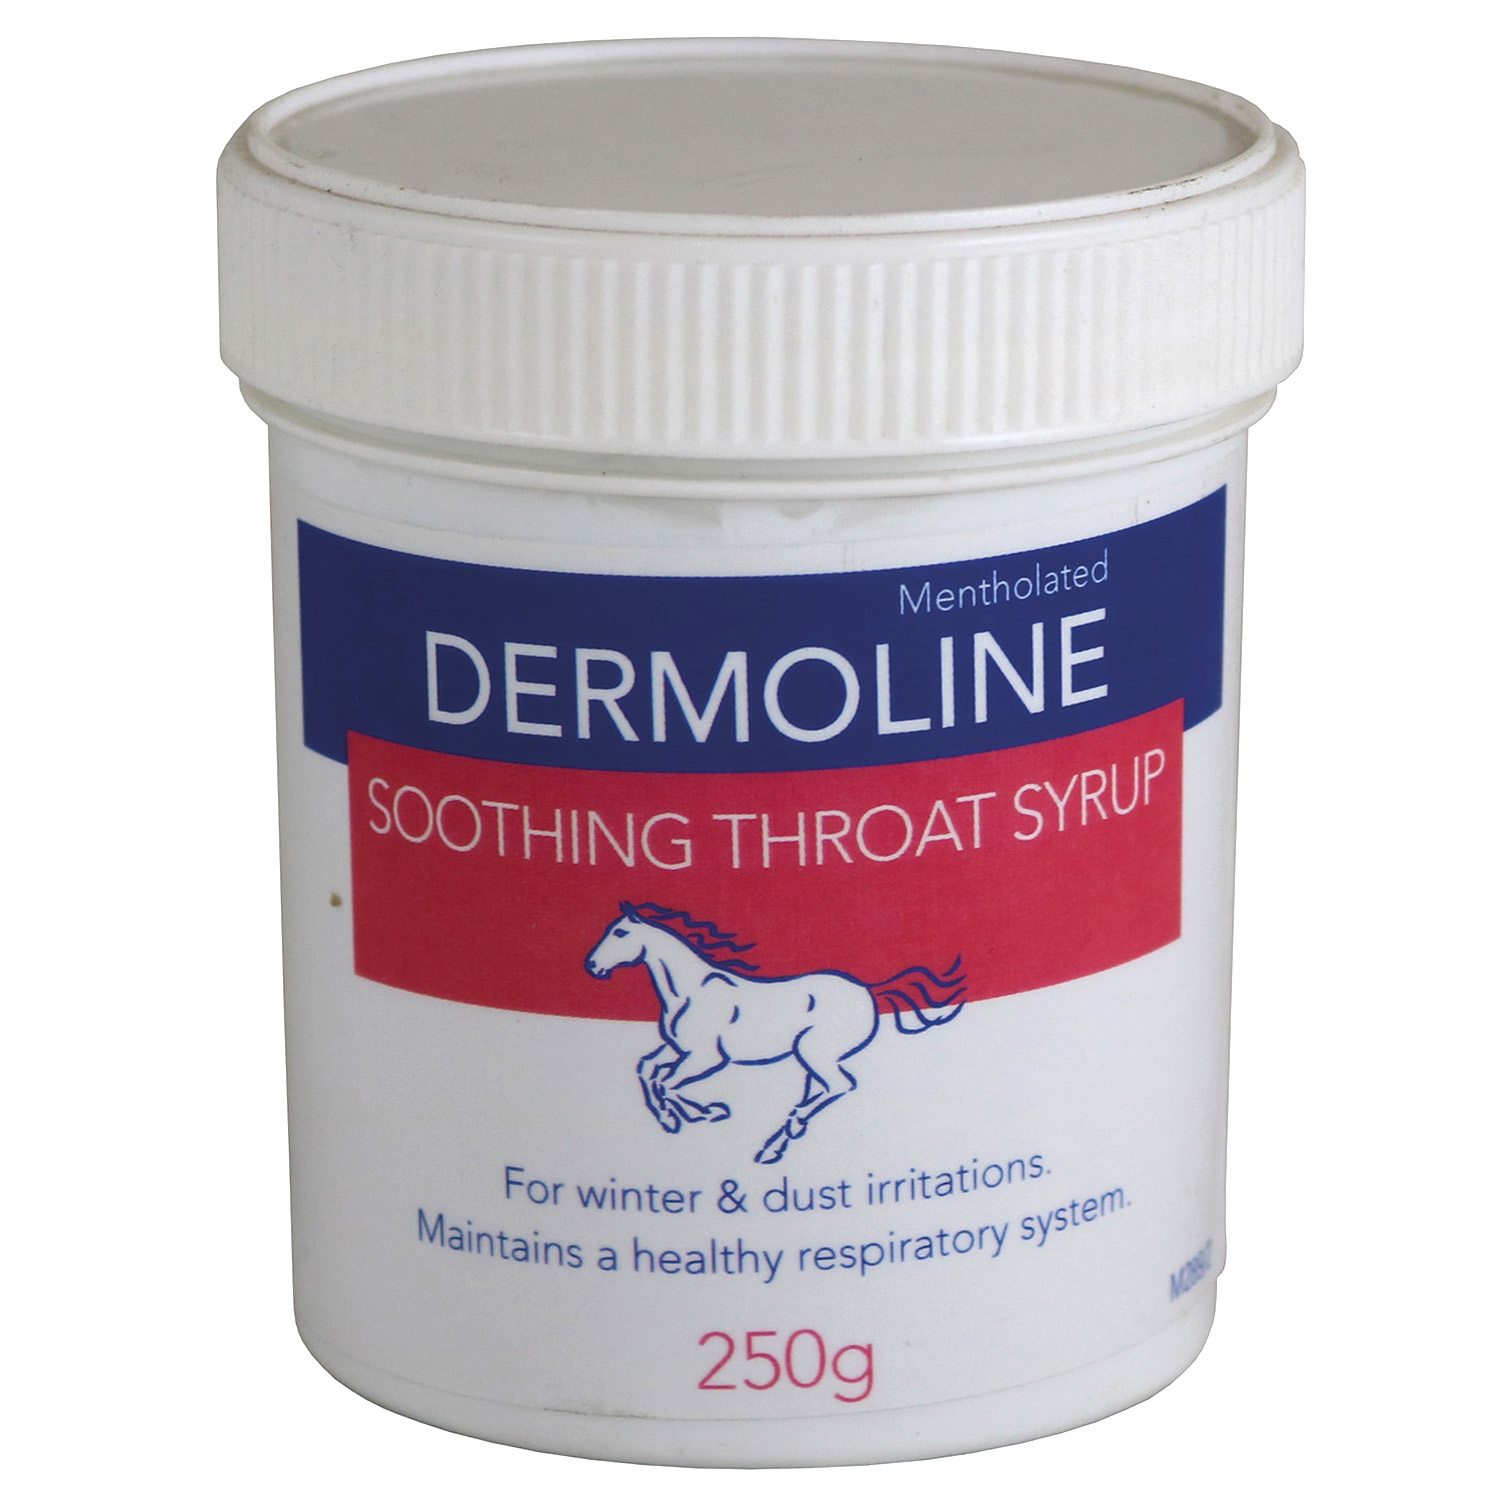 DERMOLINE SOOTHING THROAT SYRUP DERMOLINE SOOTHING THROAT SYRUP 250 GM  250 GM